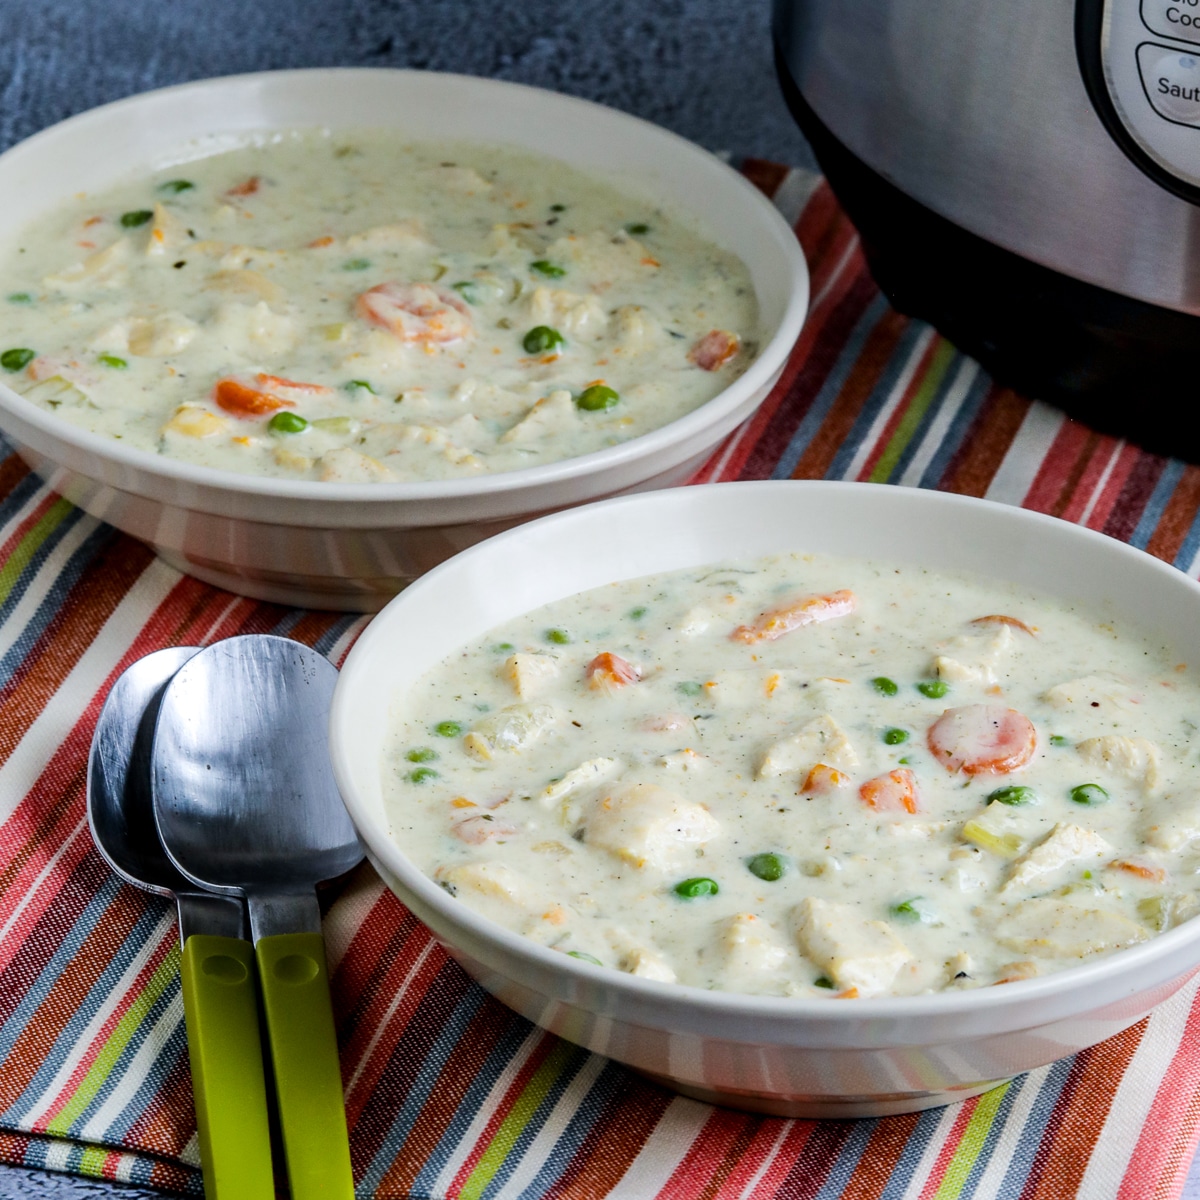 Instant Pot Chicken Pot Pie Soup shown in two bowls with spoons and Instant Pot in background.